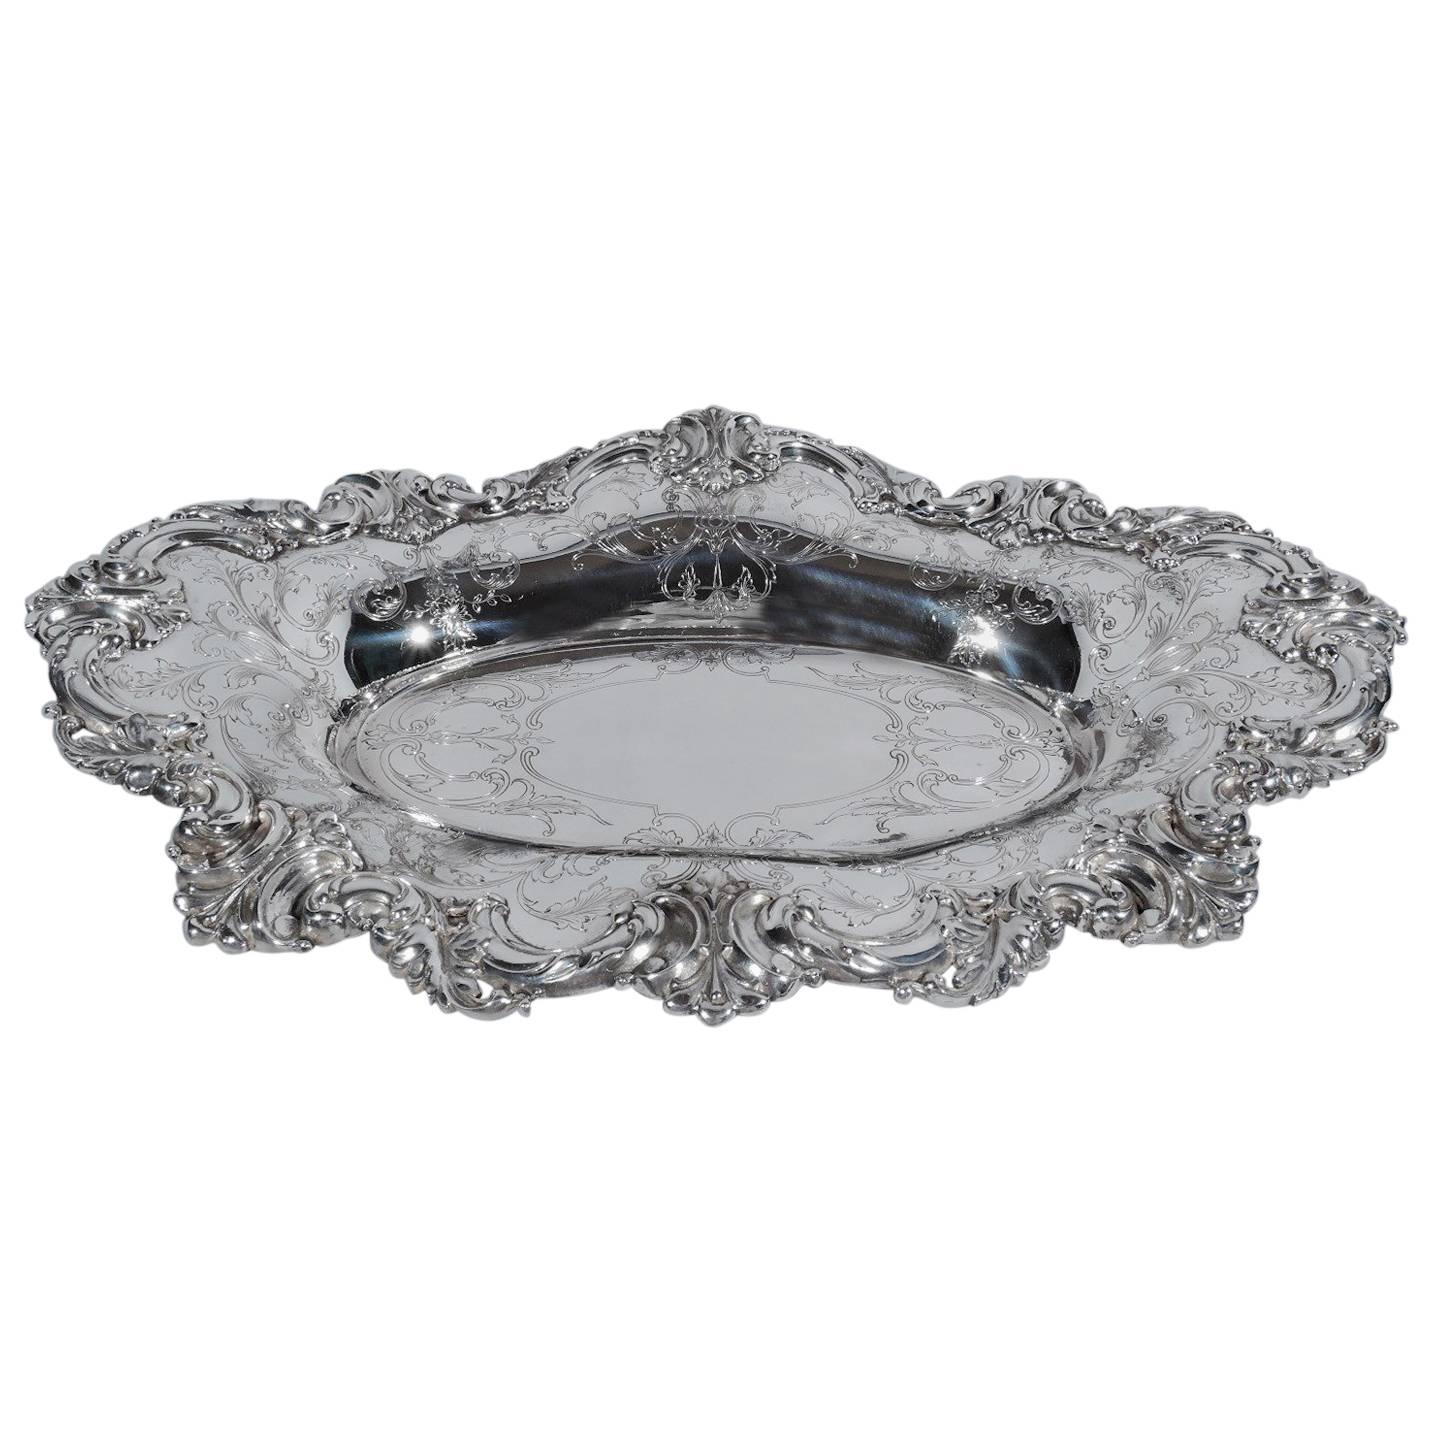 Beautiful and Sumptuous Shreve & Co. Sterling Silver Bread Tray